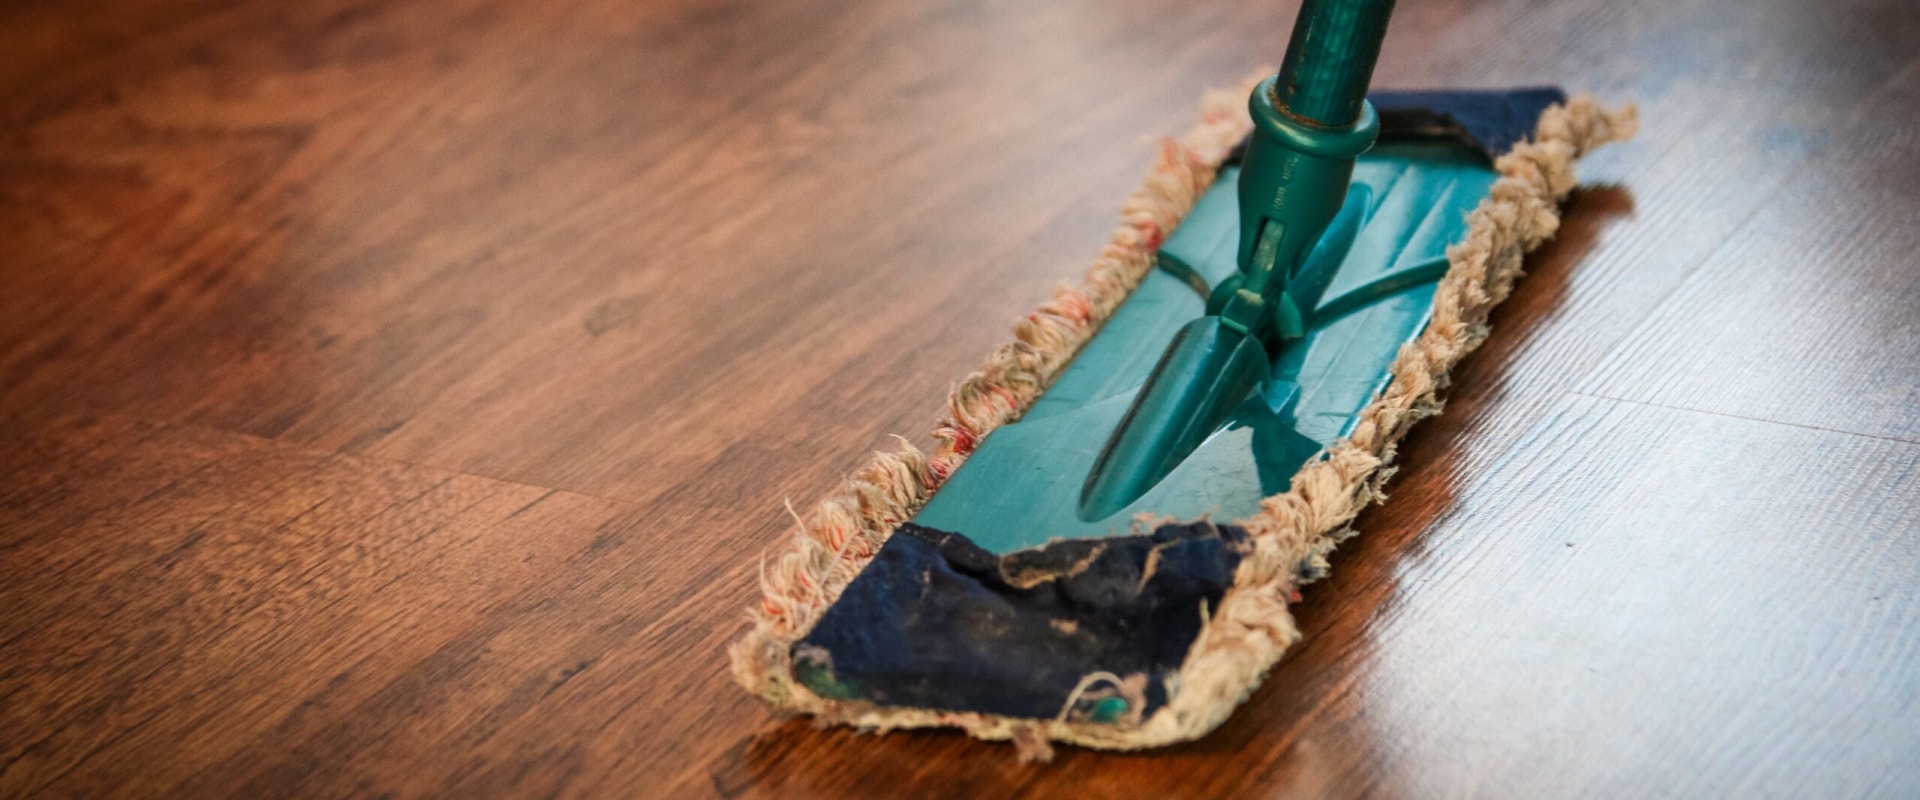 Homemade Wood Floor Disinfectant: Safe and Effective Cleaning Solutions